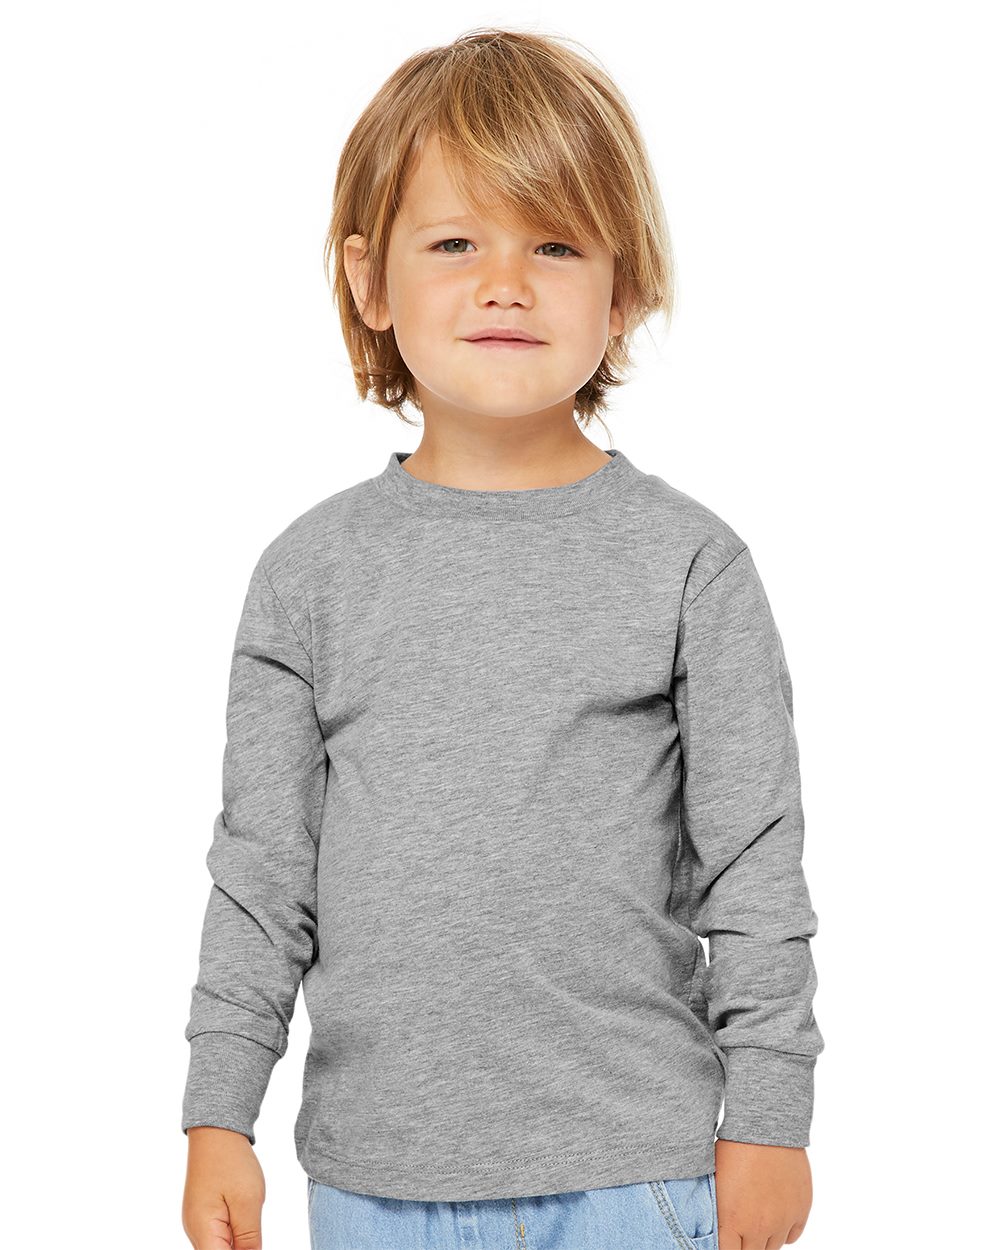 Jersey - 3501T Long + Sleeve Tee Toddler CANVAS BELLA